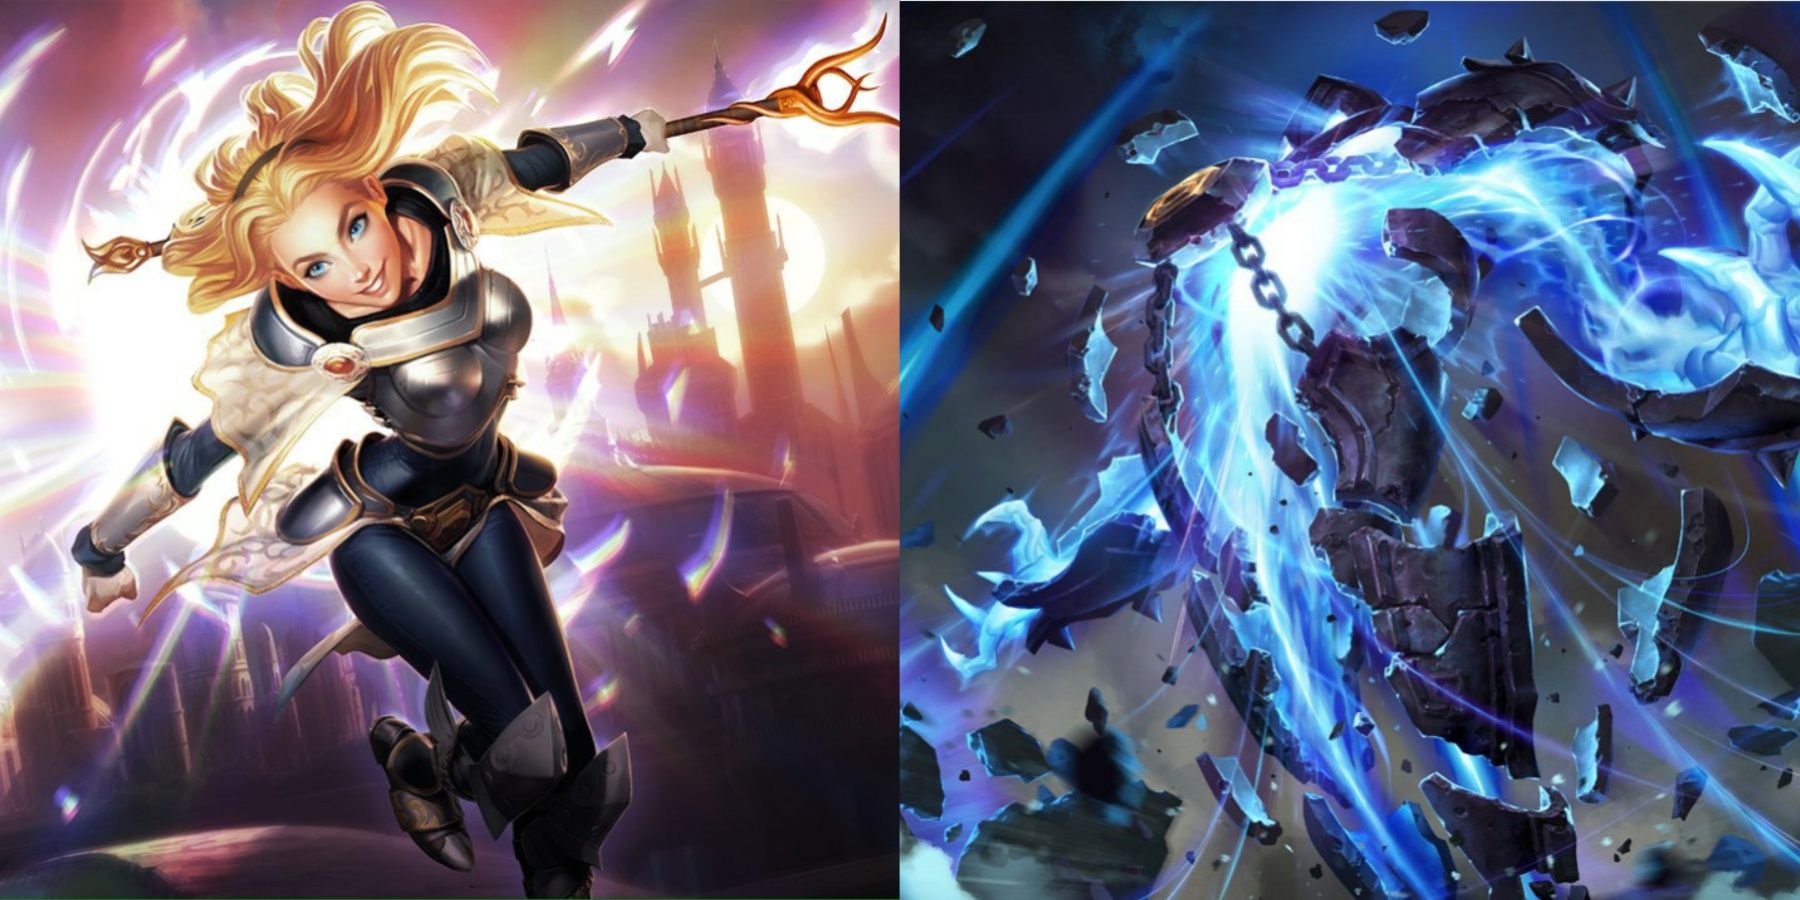 Lux and Xerath charging up their spells in their League of Legends splash arts